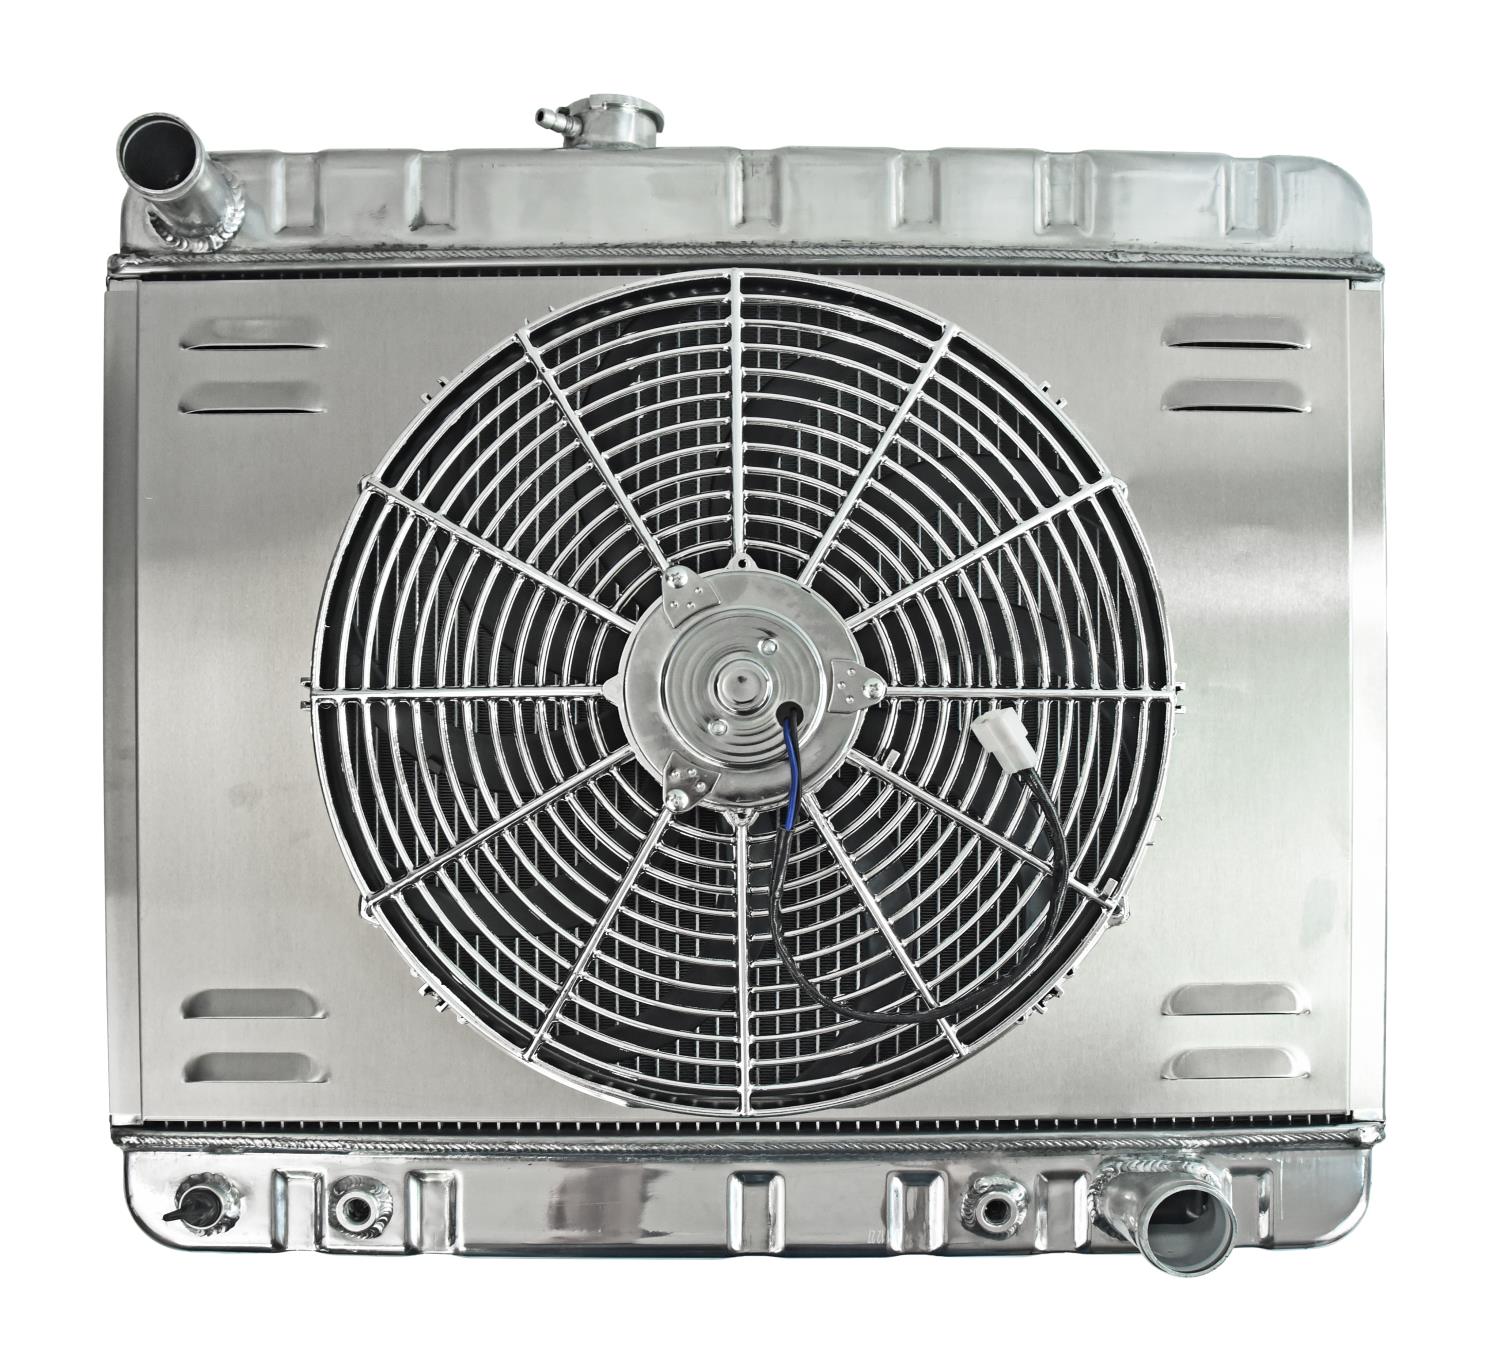 Aluminum Radiator & Fan Combo for 1966-1967 Pontiac GTO, Tempest, & LeMans [With Factory Air Conditioning] [16 in. Fan]